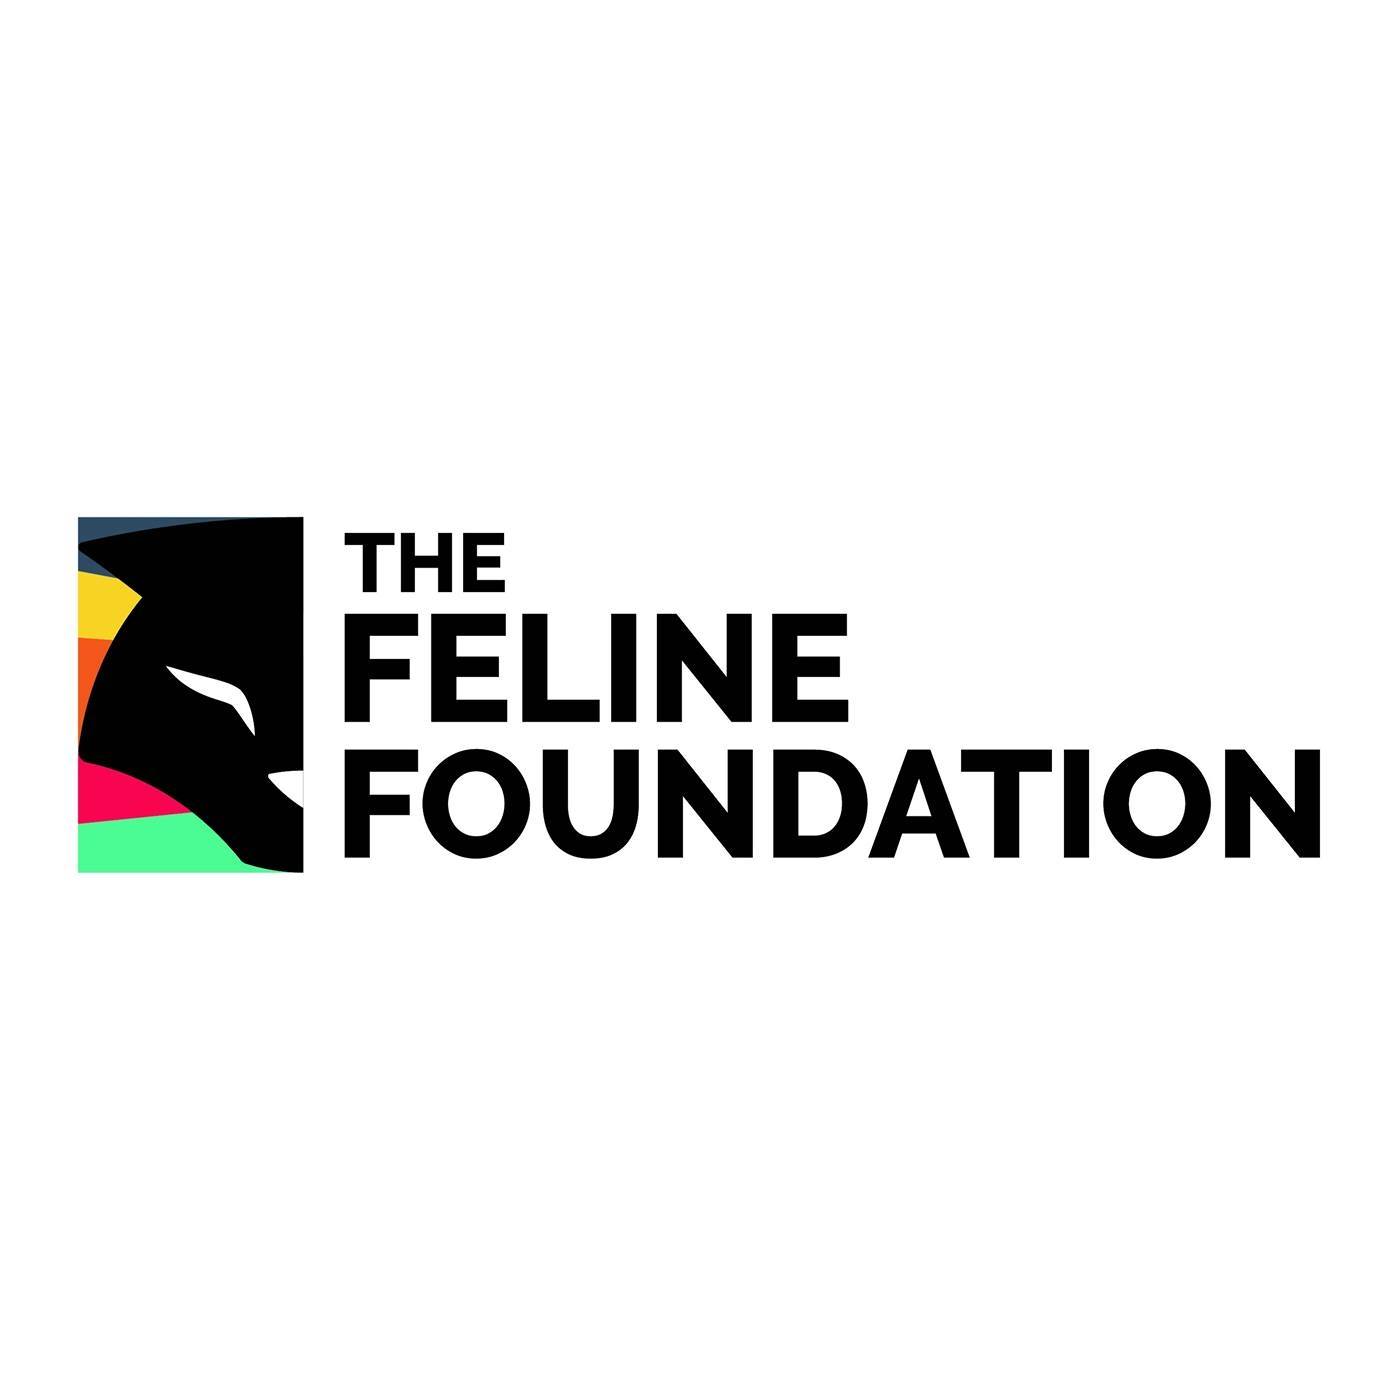 The Feline Foundation Community Veterinary Clinic and Pet Store|Dentists|Medical Services